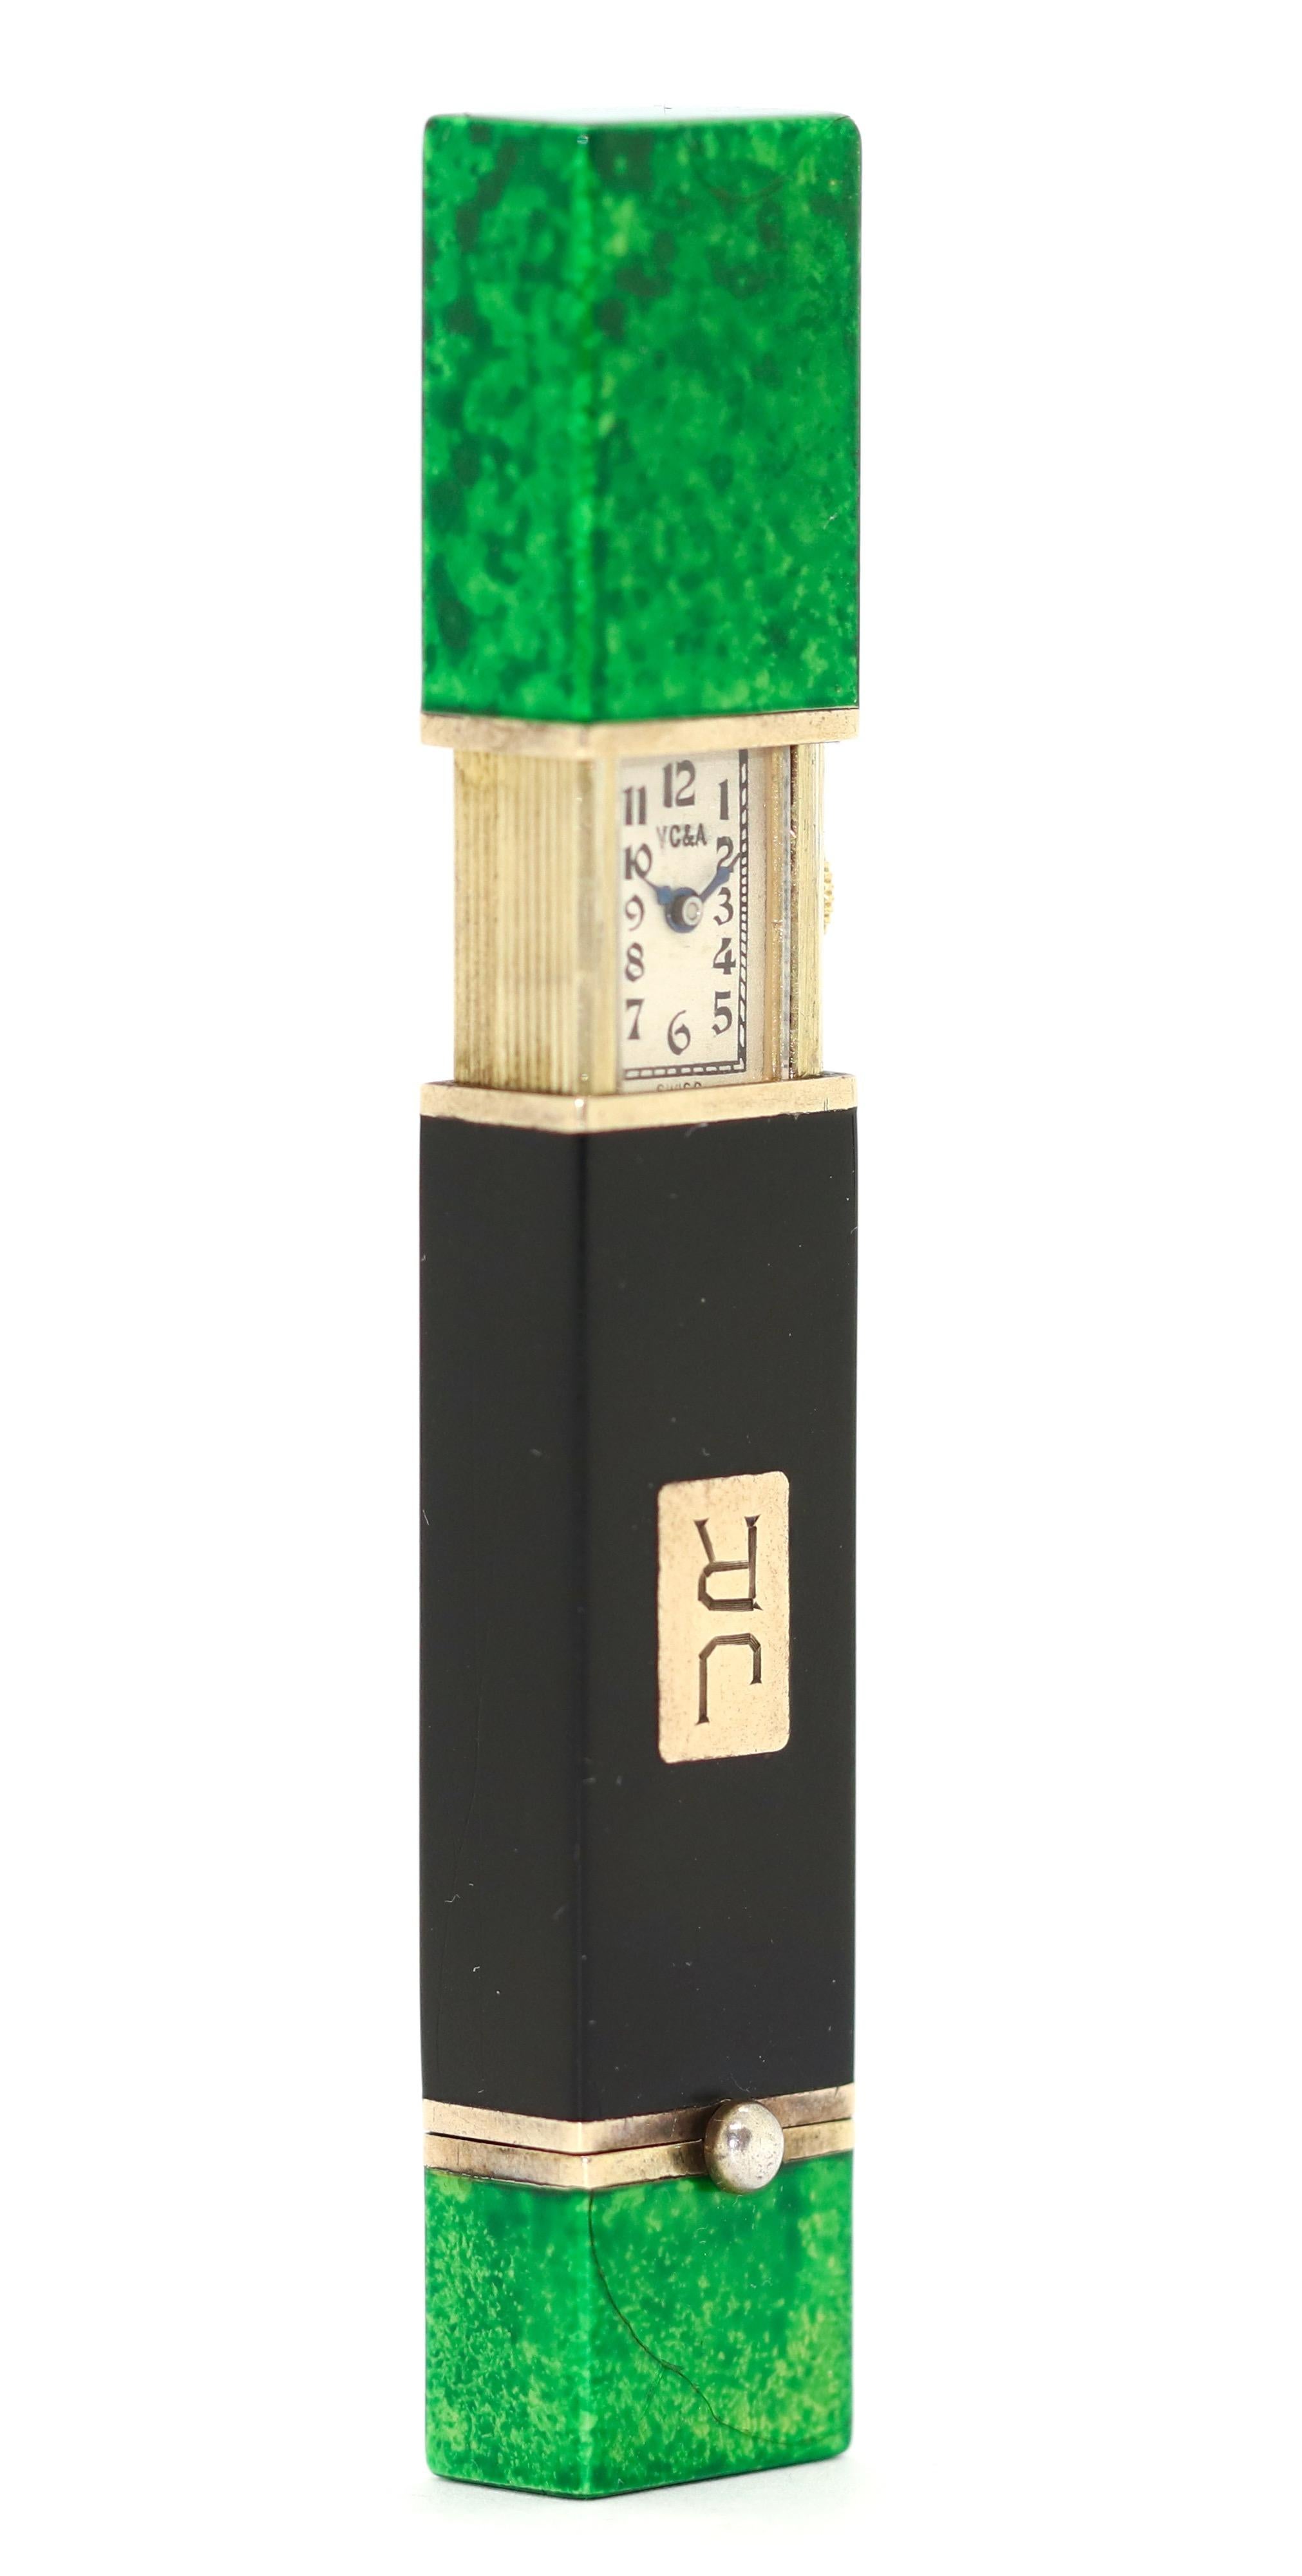 Uncut Van Cleef & Arpels 2 in 1 Lipstick Holder and Pocket Watch, Malachite and Onyx For Sale